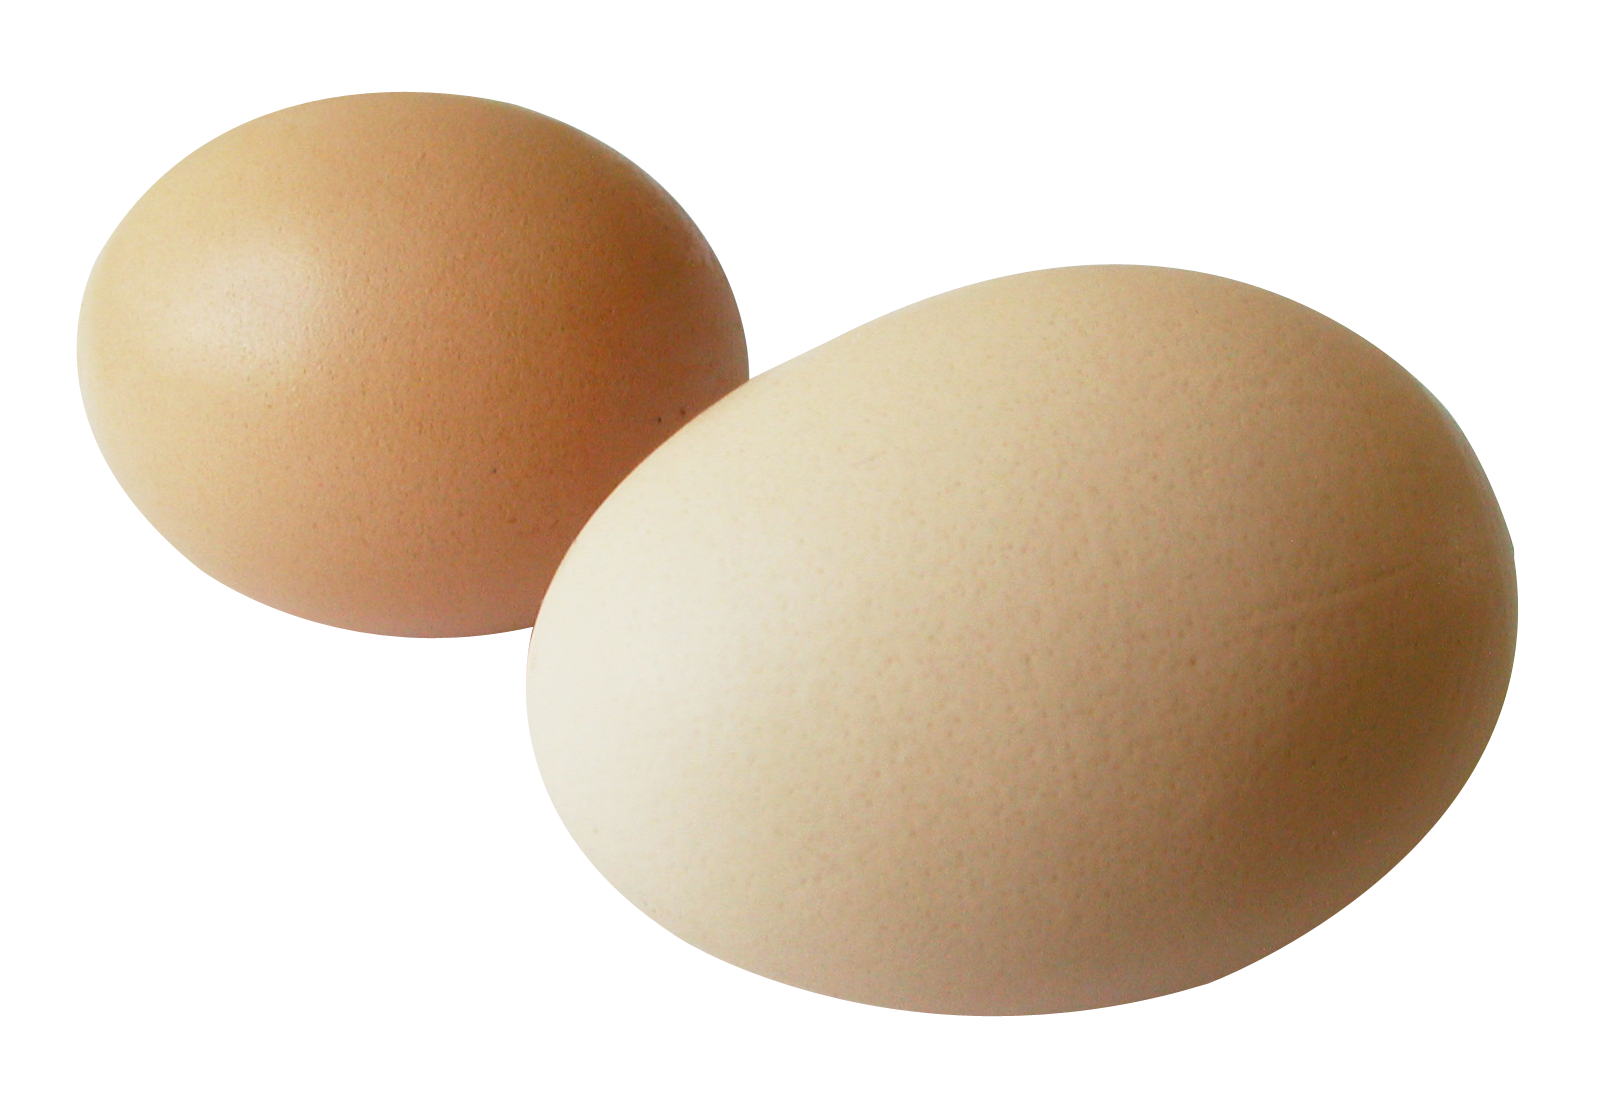 Egg PNG Image  Food png, Eggs, Png images